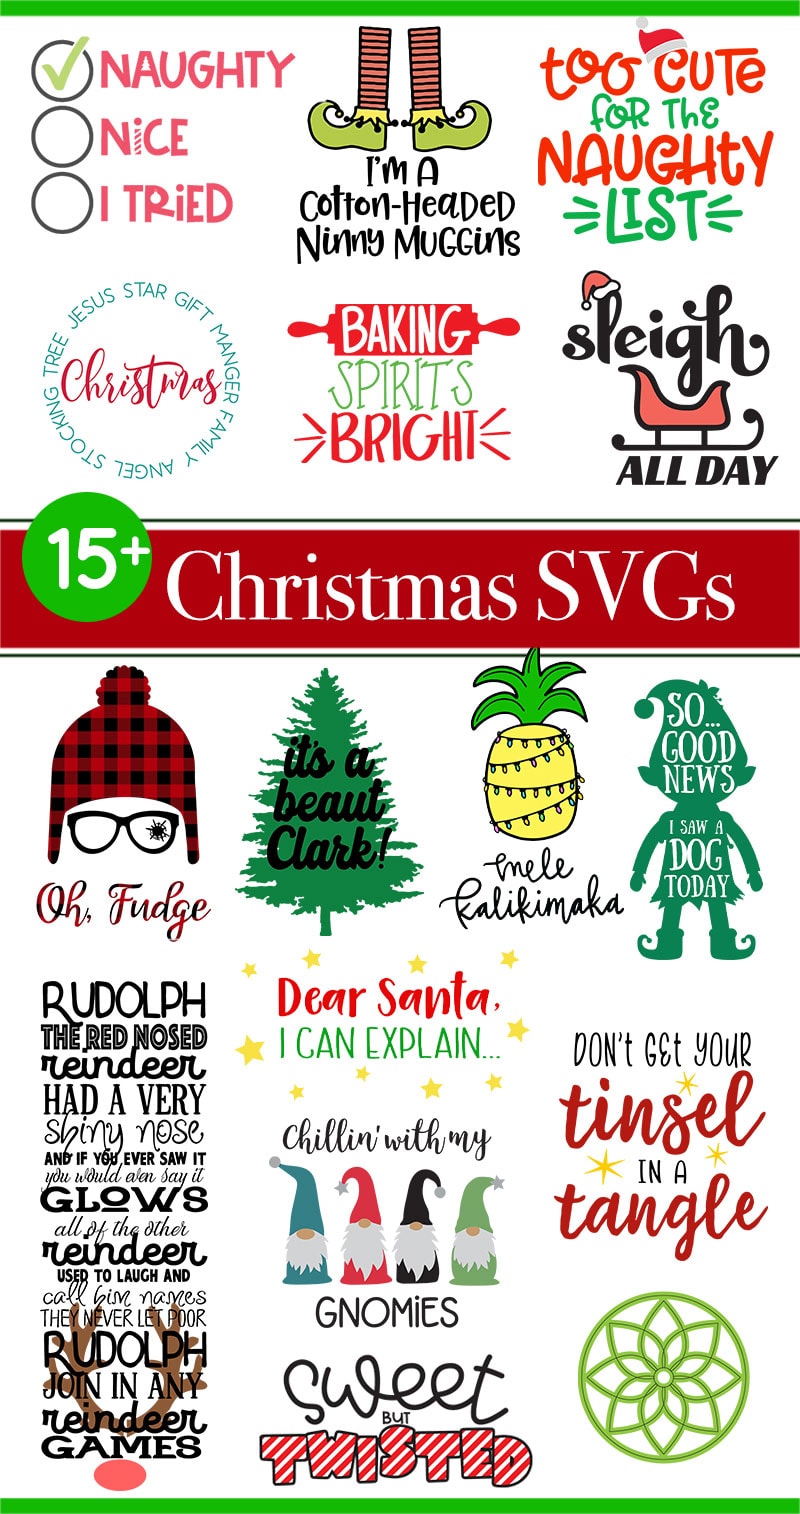 Over 15 Christmas SVG files you can use to make your own Cricut Projects